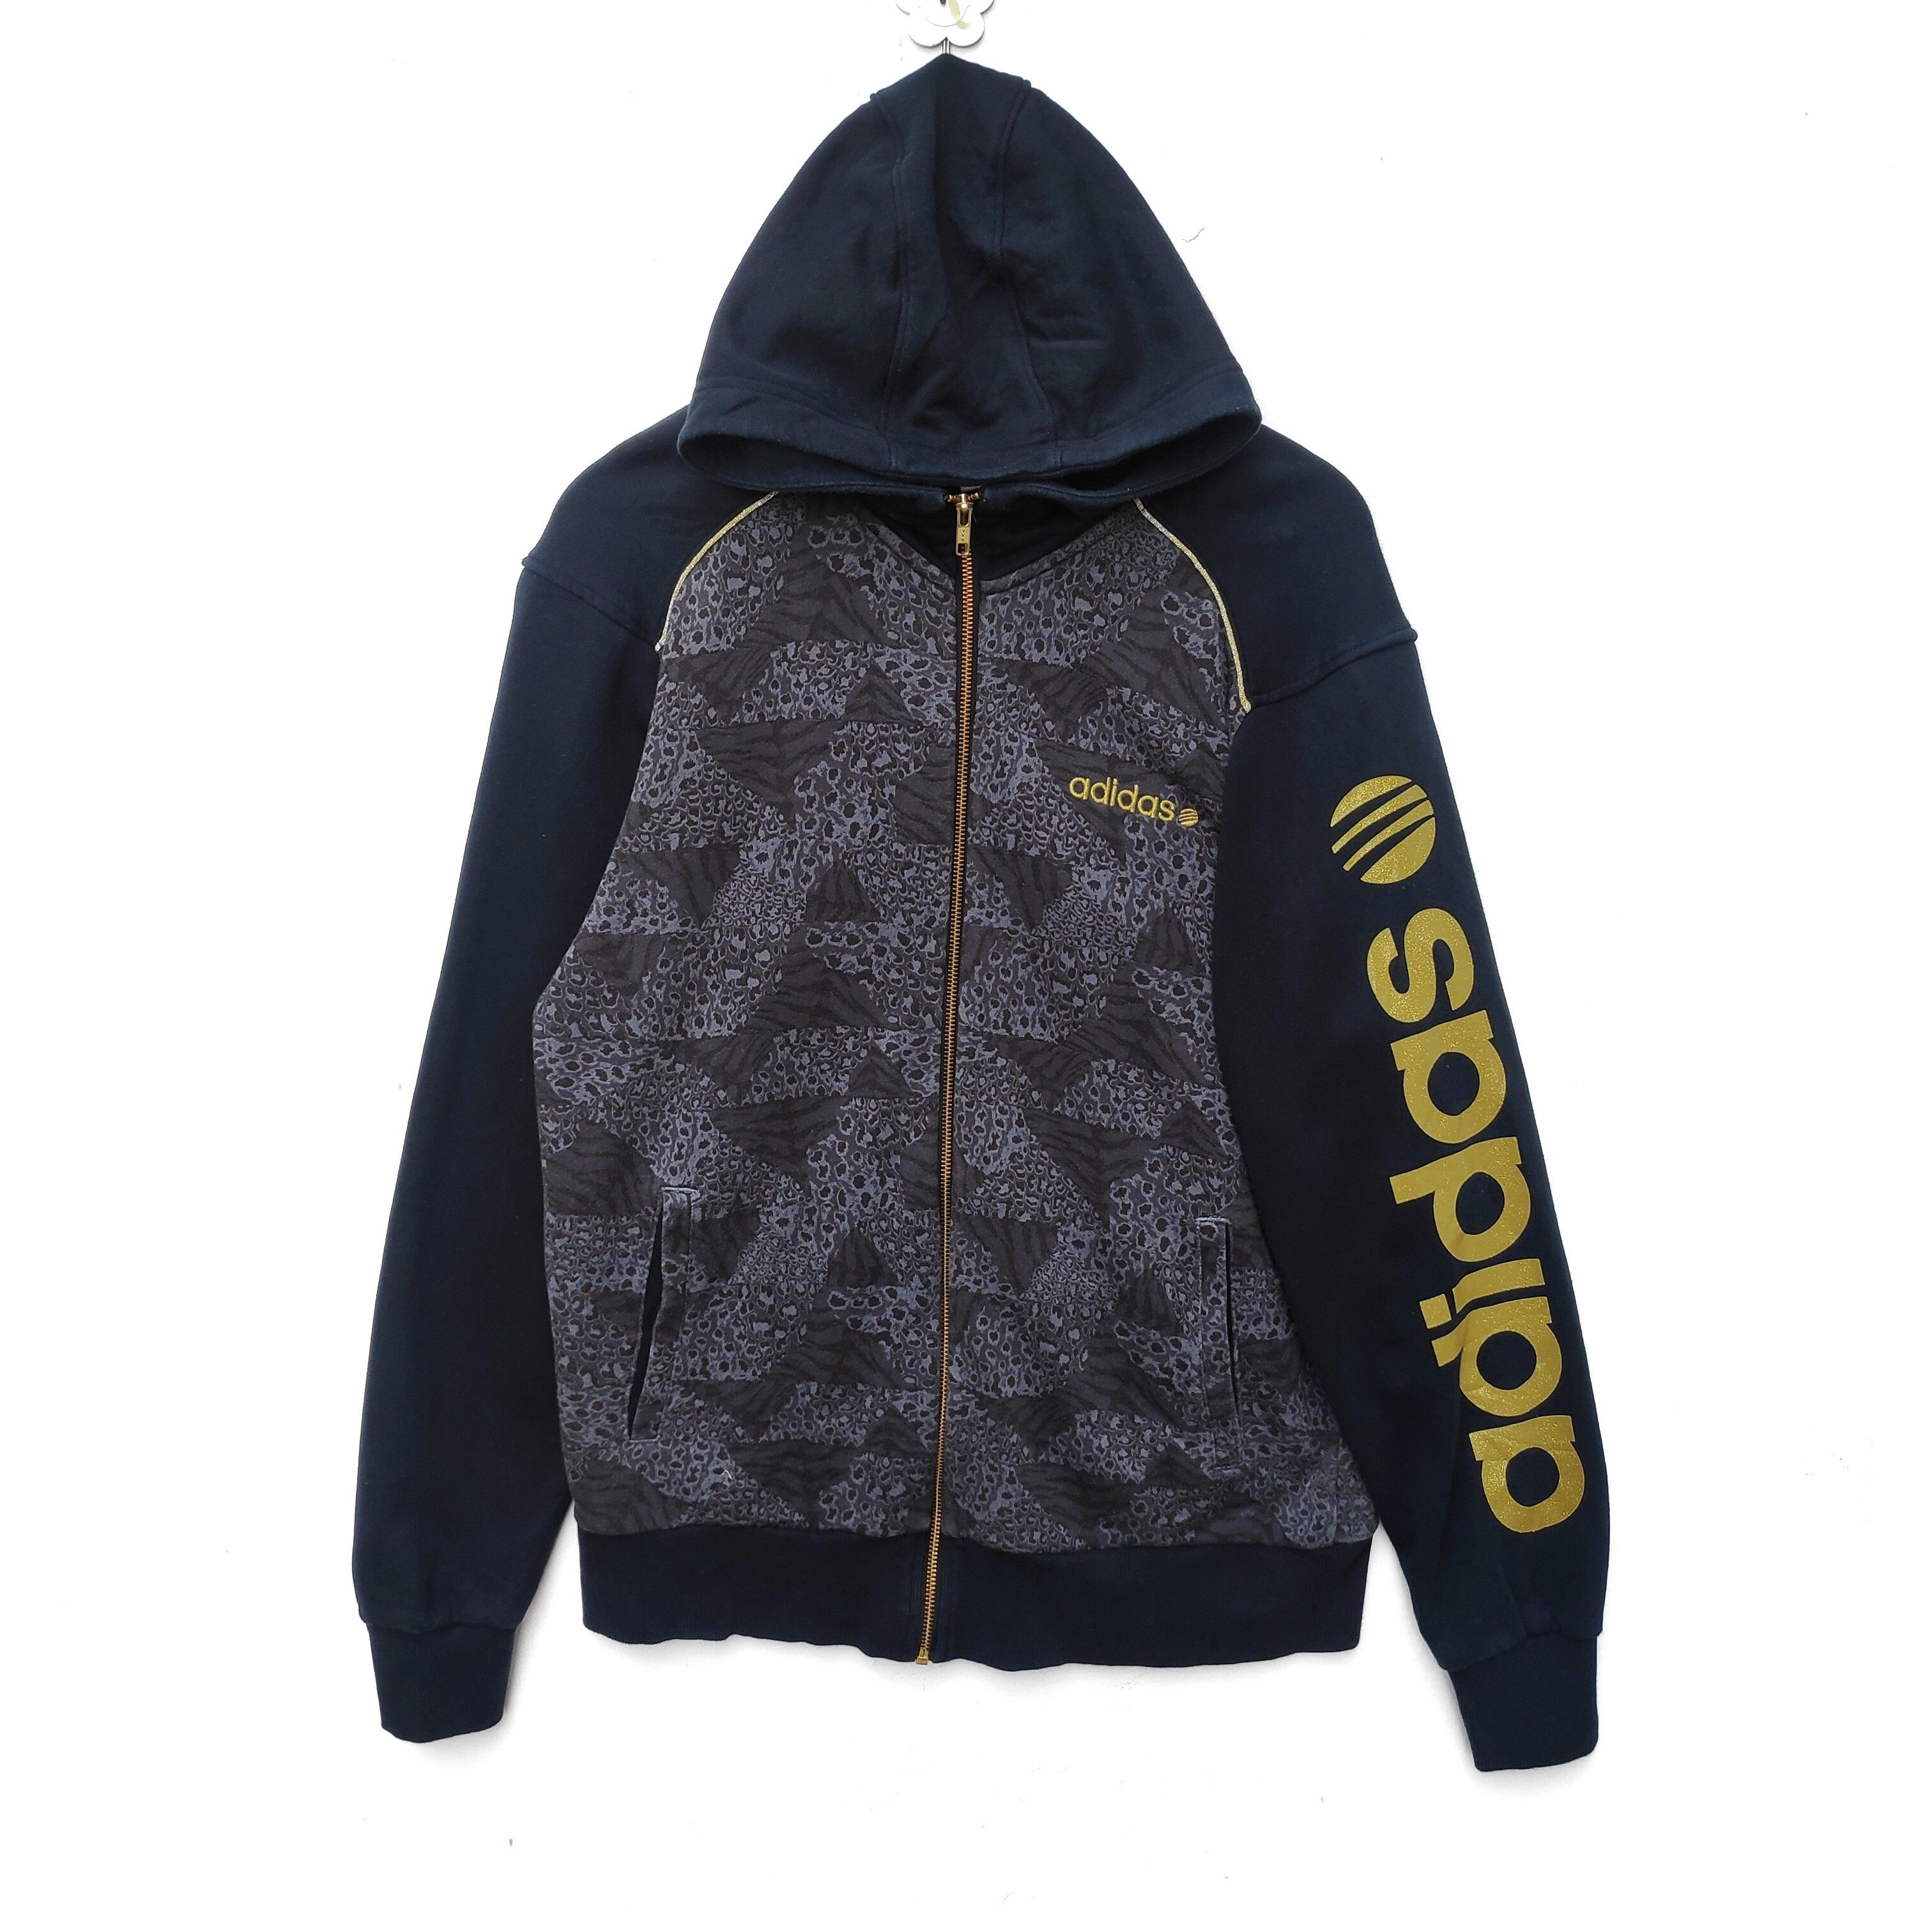 Adidas Adidas Neo Hoodie Large Size Black Gold Dope sportswear Size US L / EU 52-54 / 3 - 1 Preview